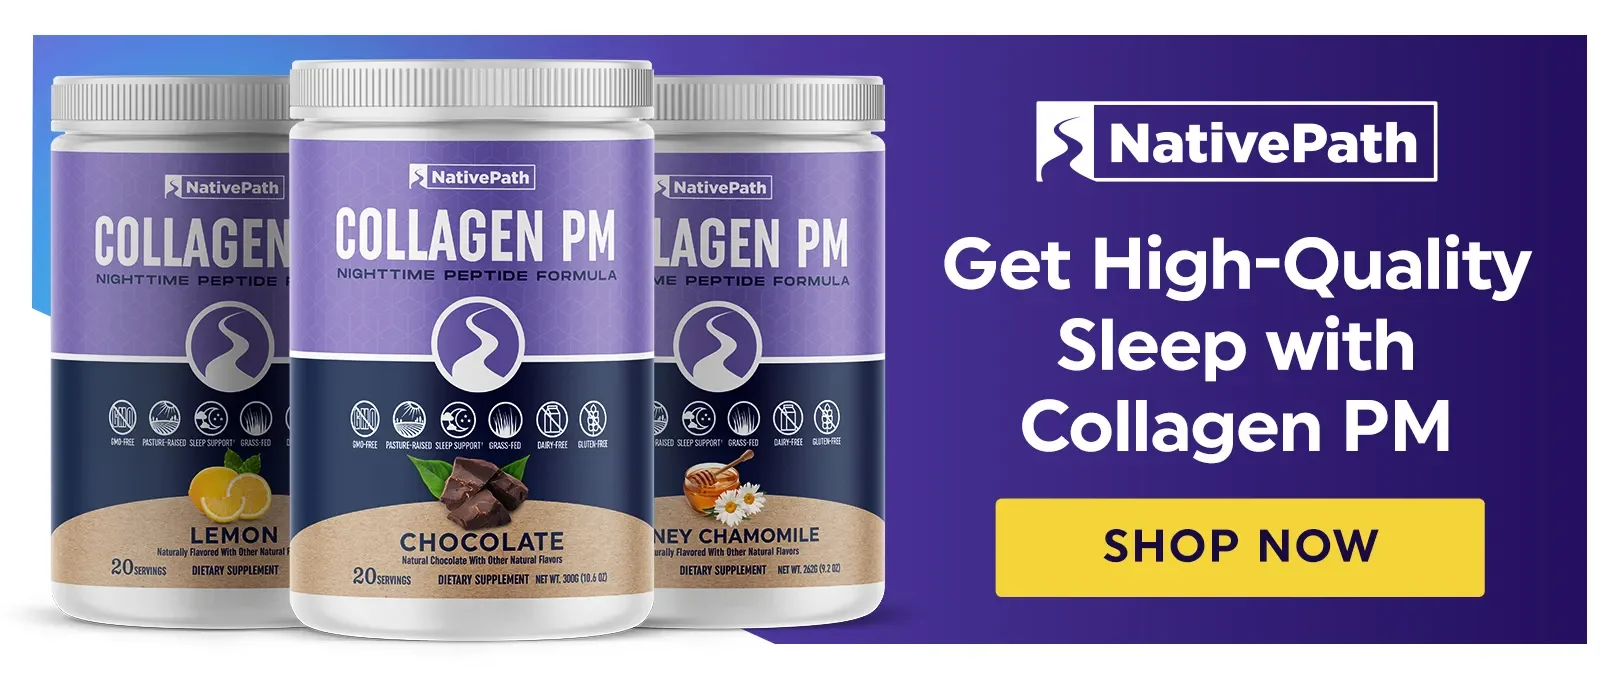 Get High-Quality Sleep with NativePath Collagen PM